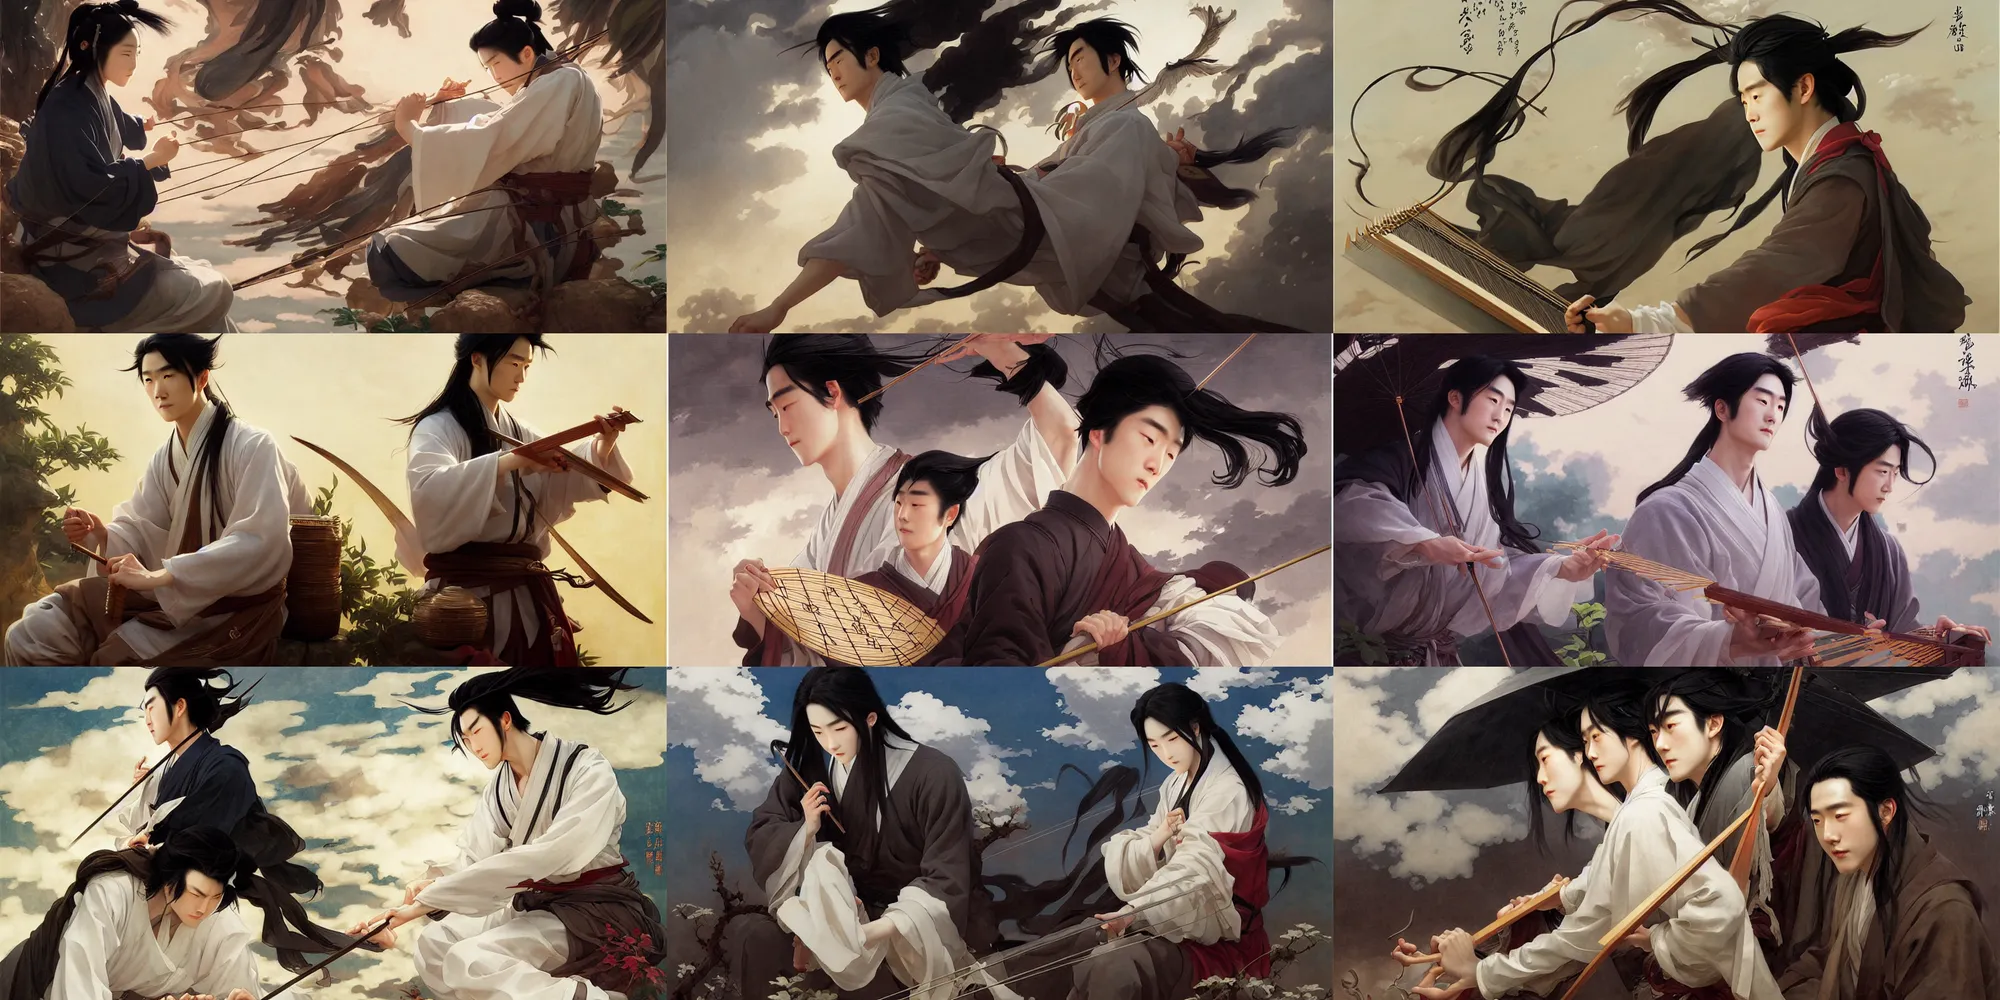 Prompt: lan zhan playing zither mo zu dao shi portrait, dark, heavenly clouds, white and pure, peaceful, in the style of studio ghibli, j. c. leyendecker and greg rutkowski